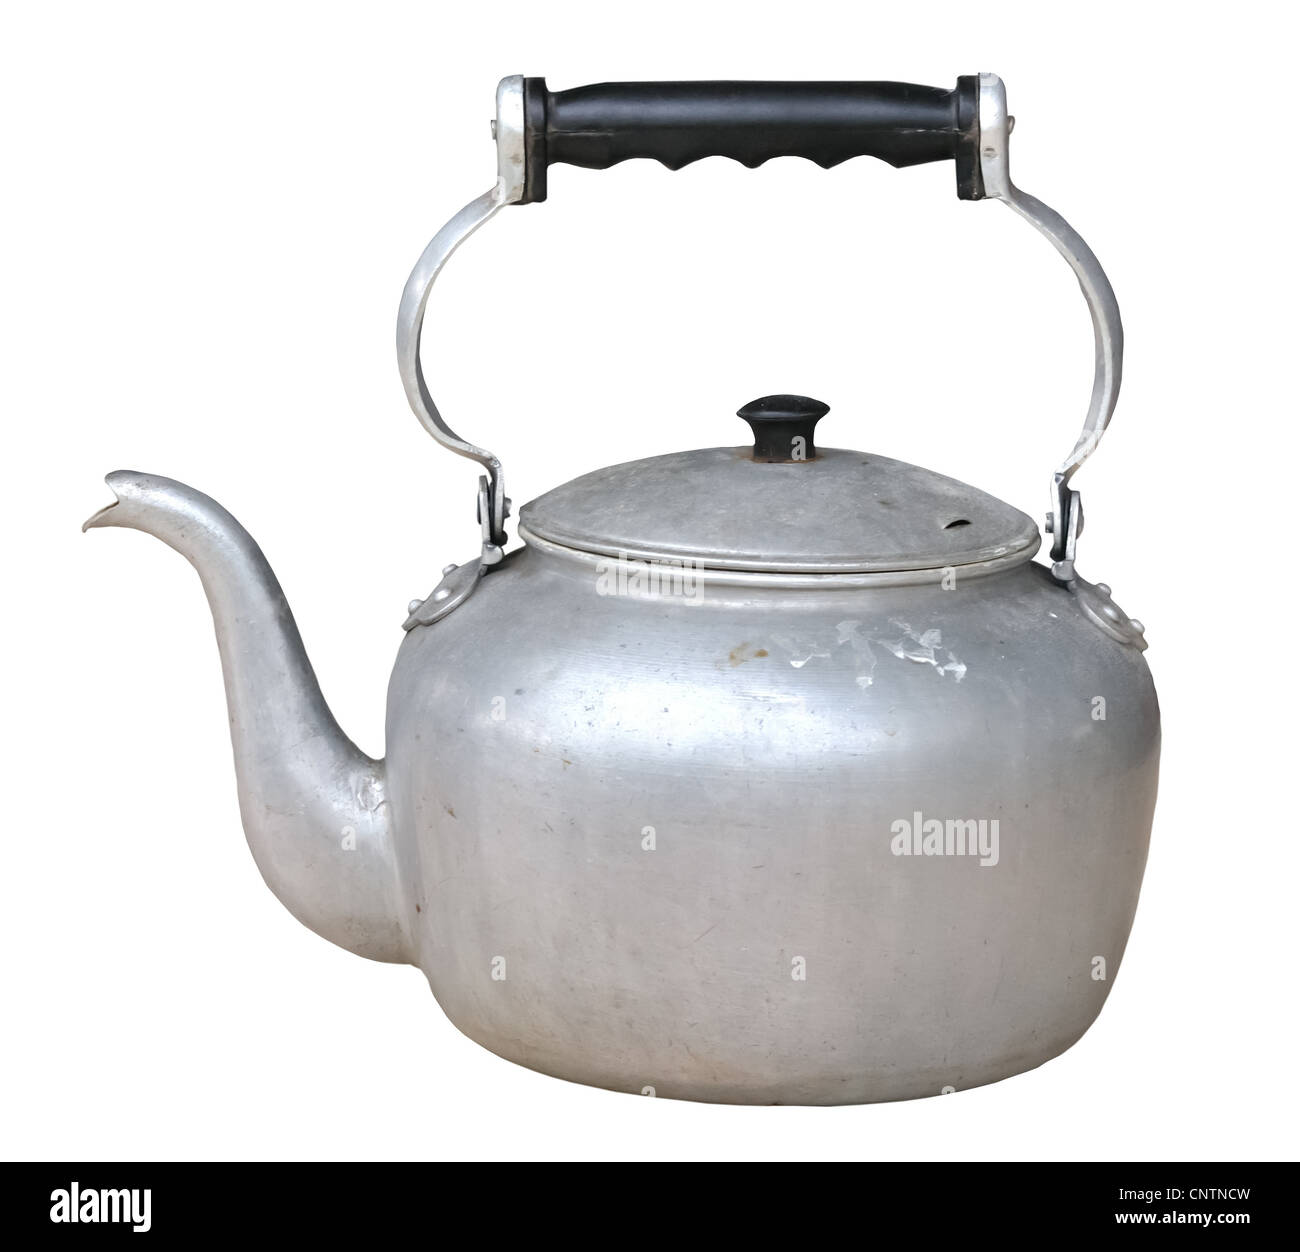 Old dirty classic kettle on white background Stock Photo